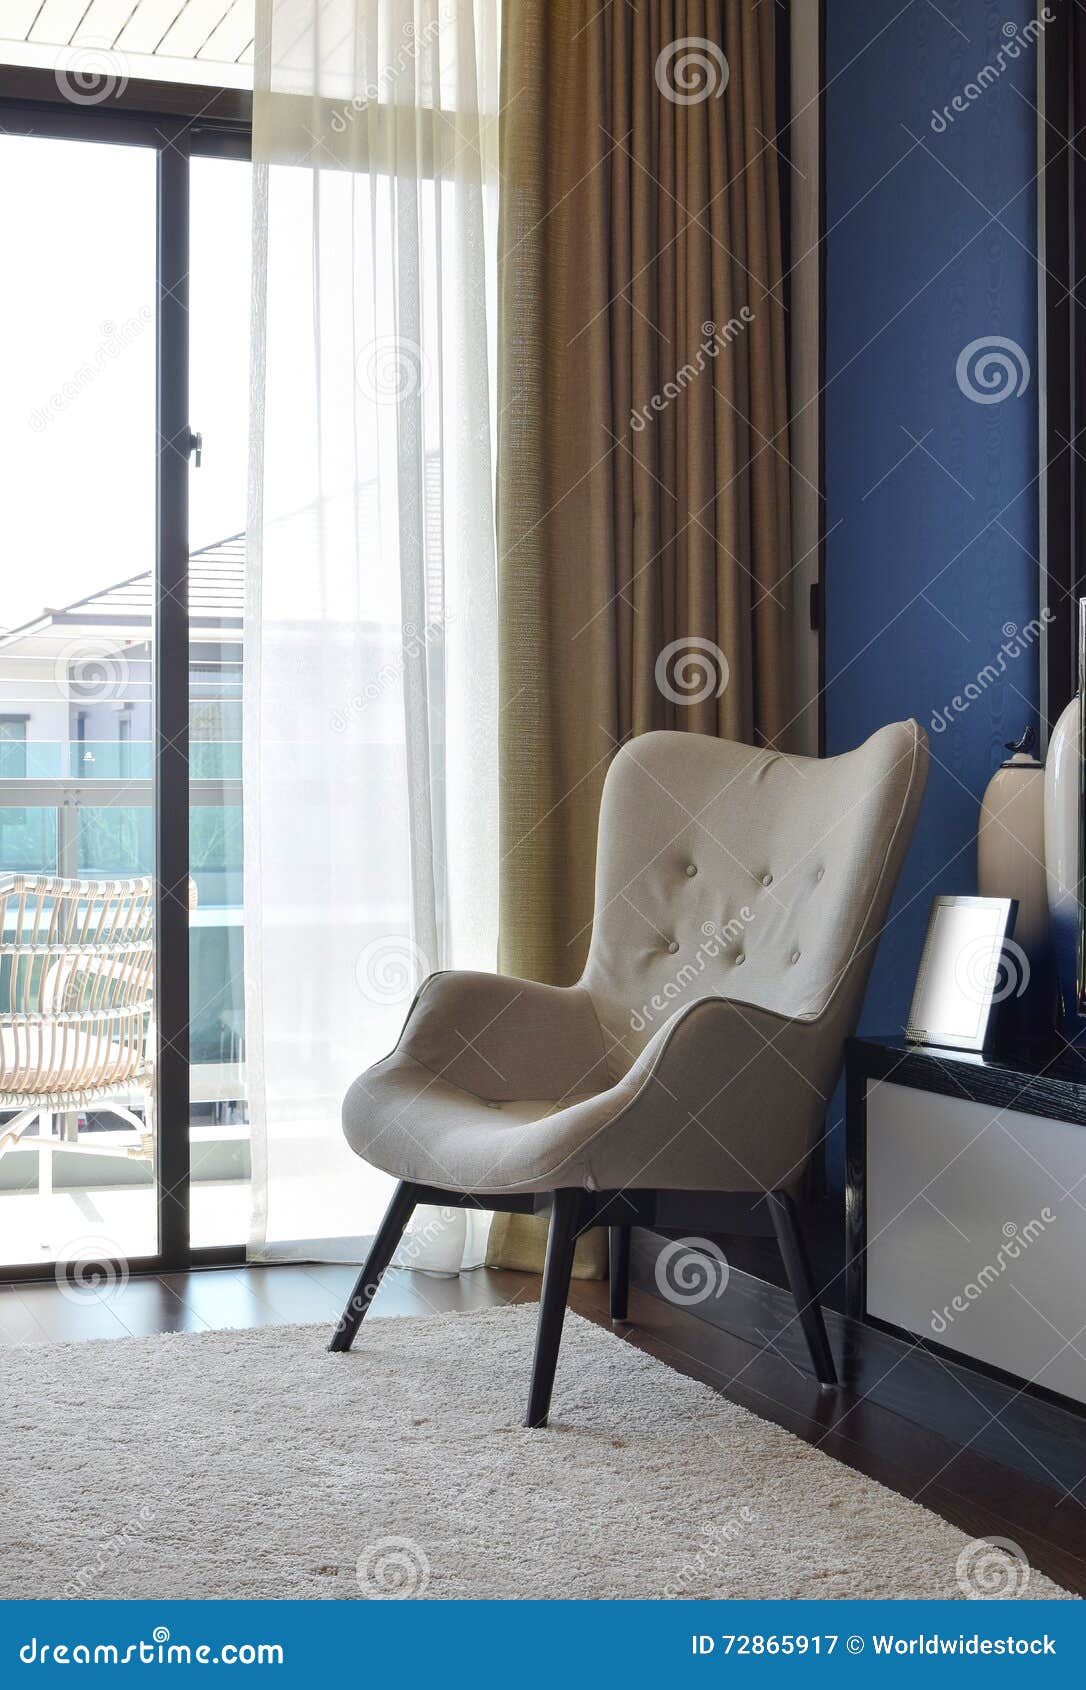 Comfortable Chair On Carpet In Modern Bedroom Stock Image